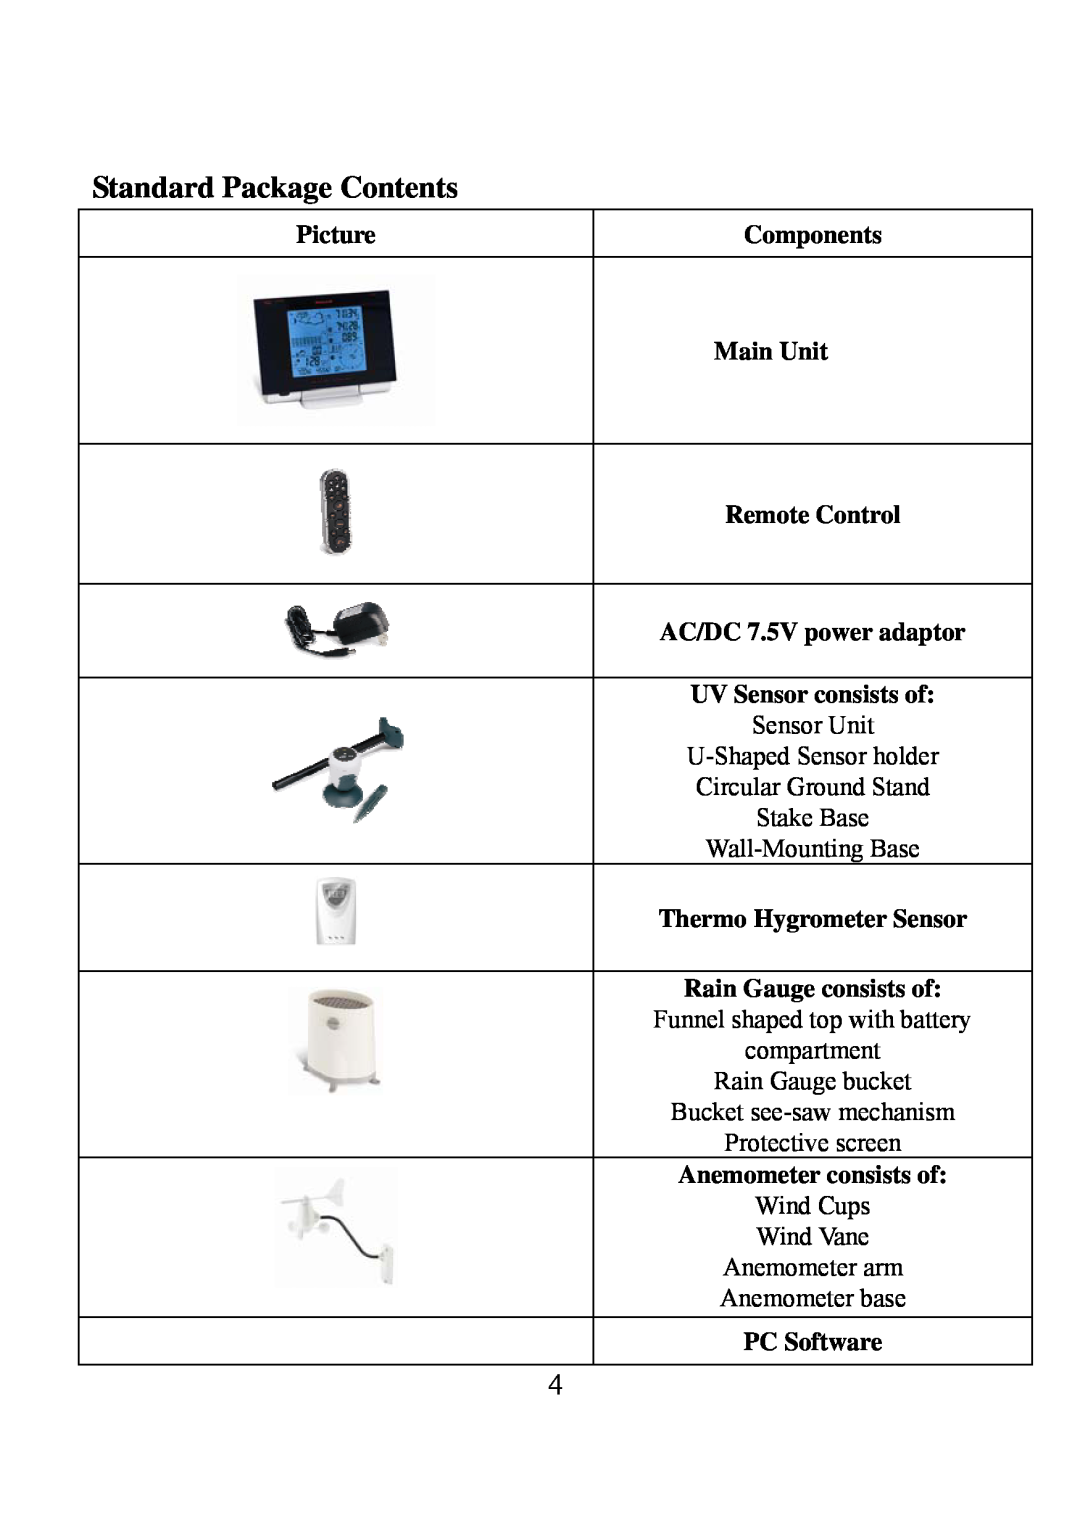 Honeywell TE923W Standard Package Contents, Picture, Components, Remote Control, AC/DC 7.5V power adaptor, PC Software 